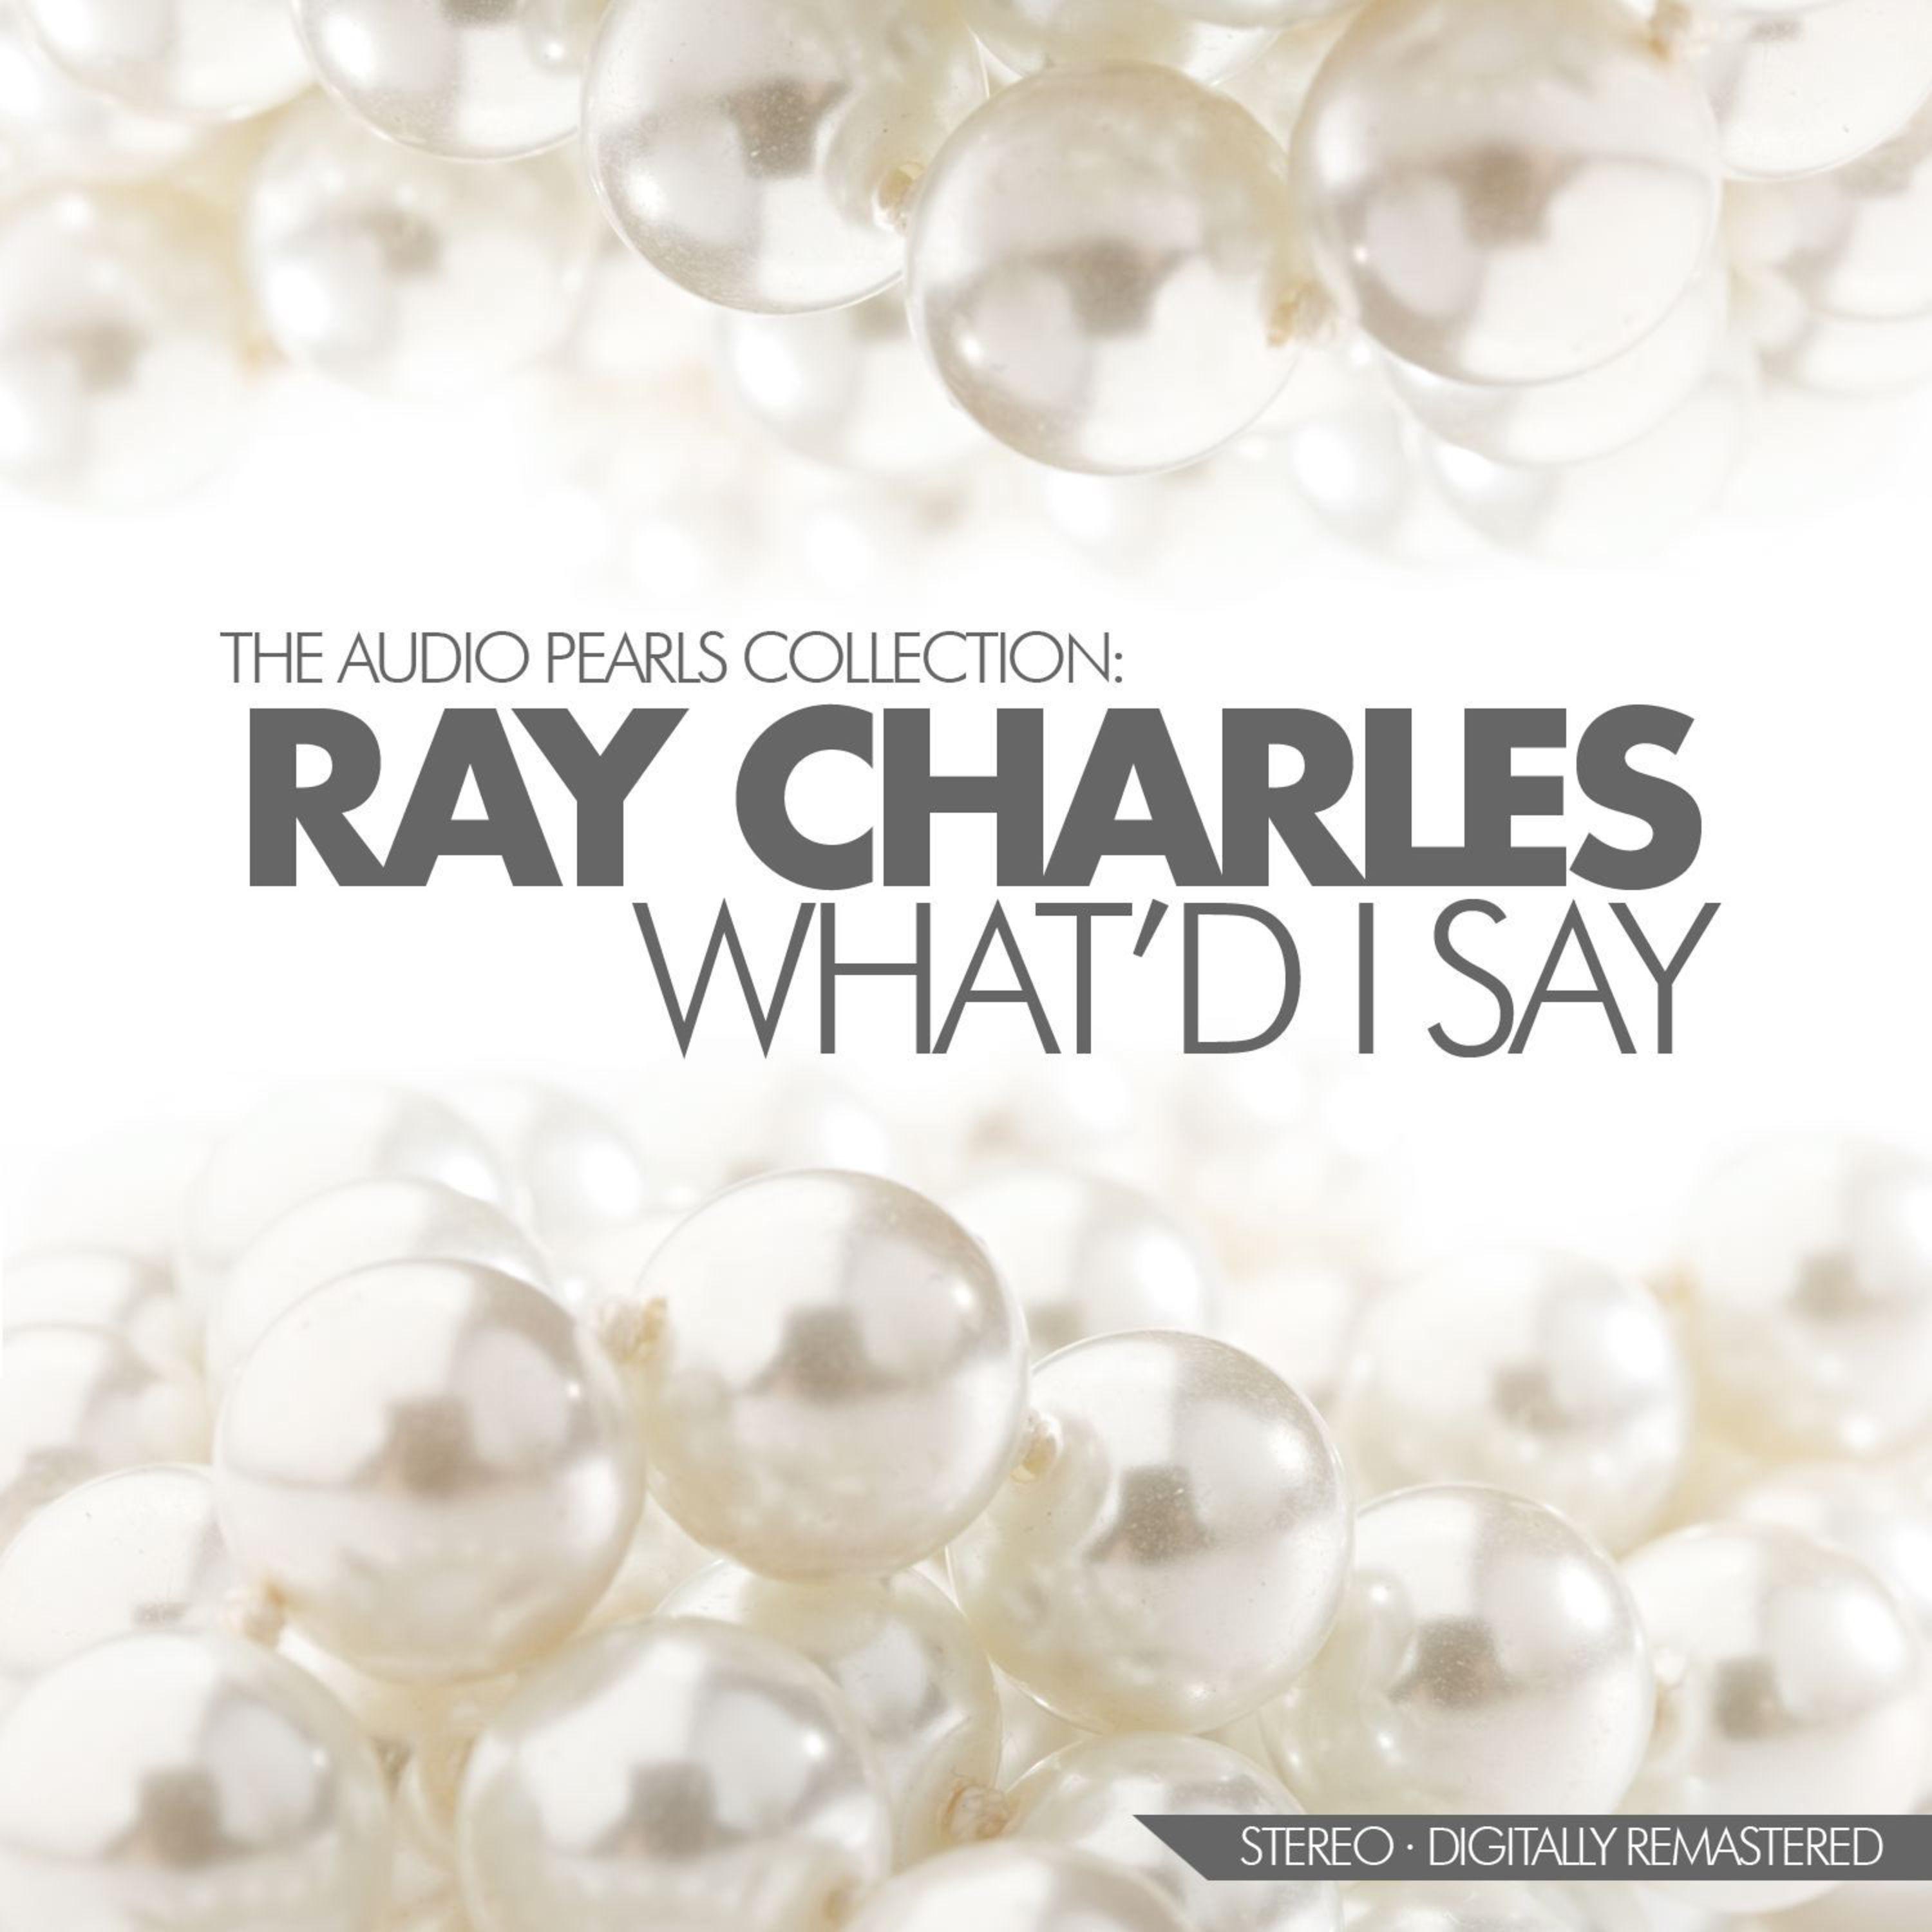 What'd I Say (The Audio Pearls Collection)专辑